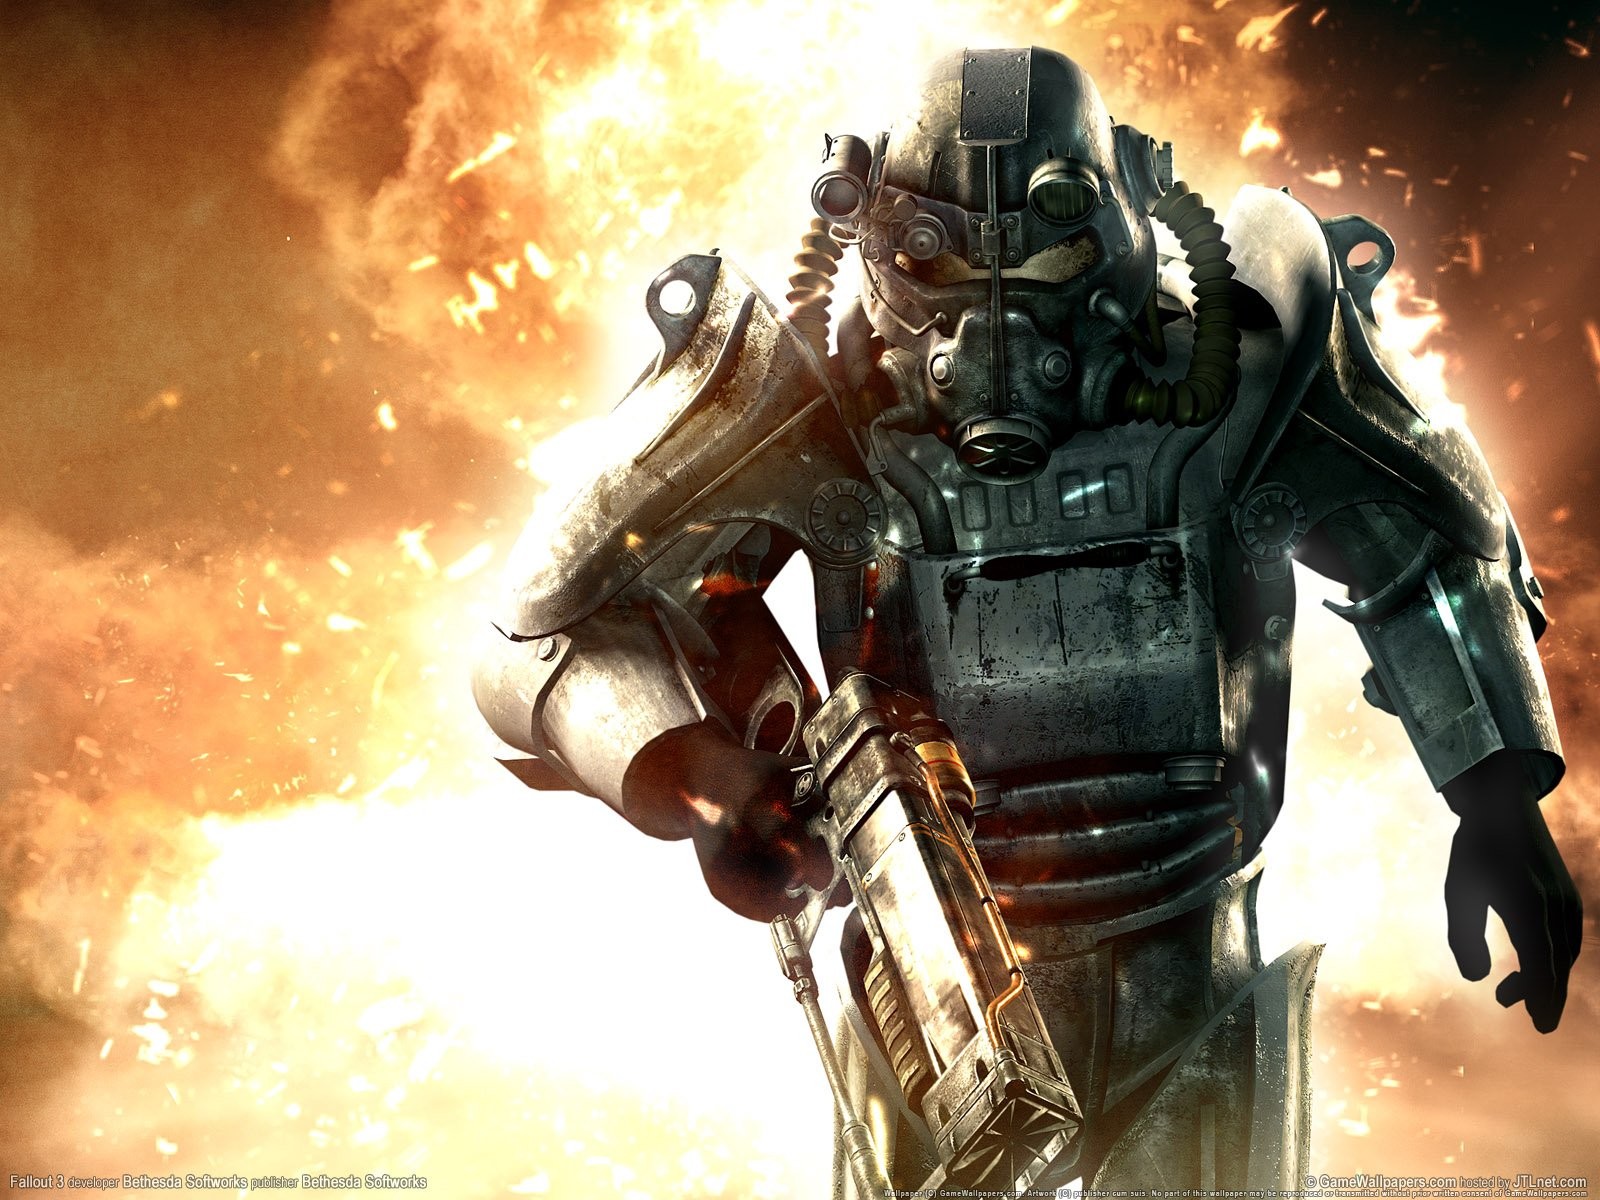 General 1600x1200 Fallout video games power armor apocalyptic fire science fiction PC gaming video game art